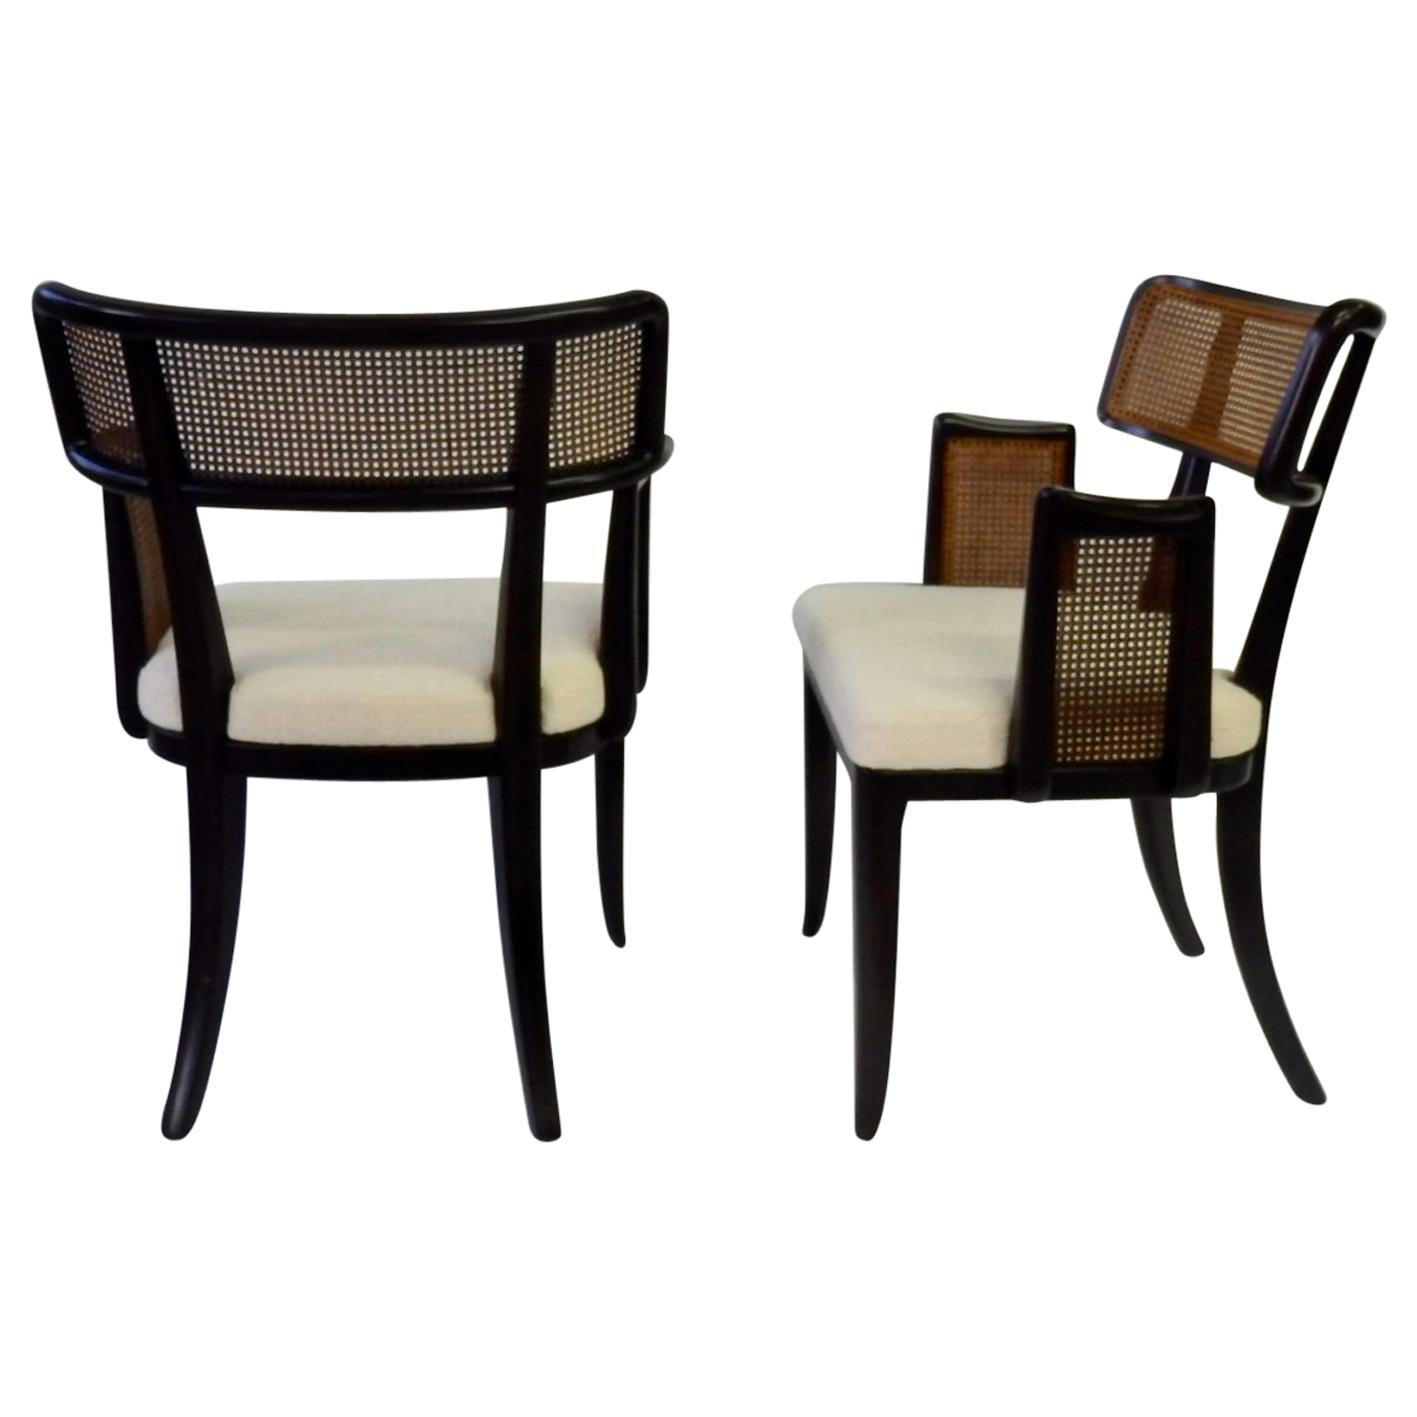 Rare Pair of Edward Wormley for Dunbar Side Chairs